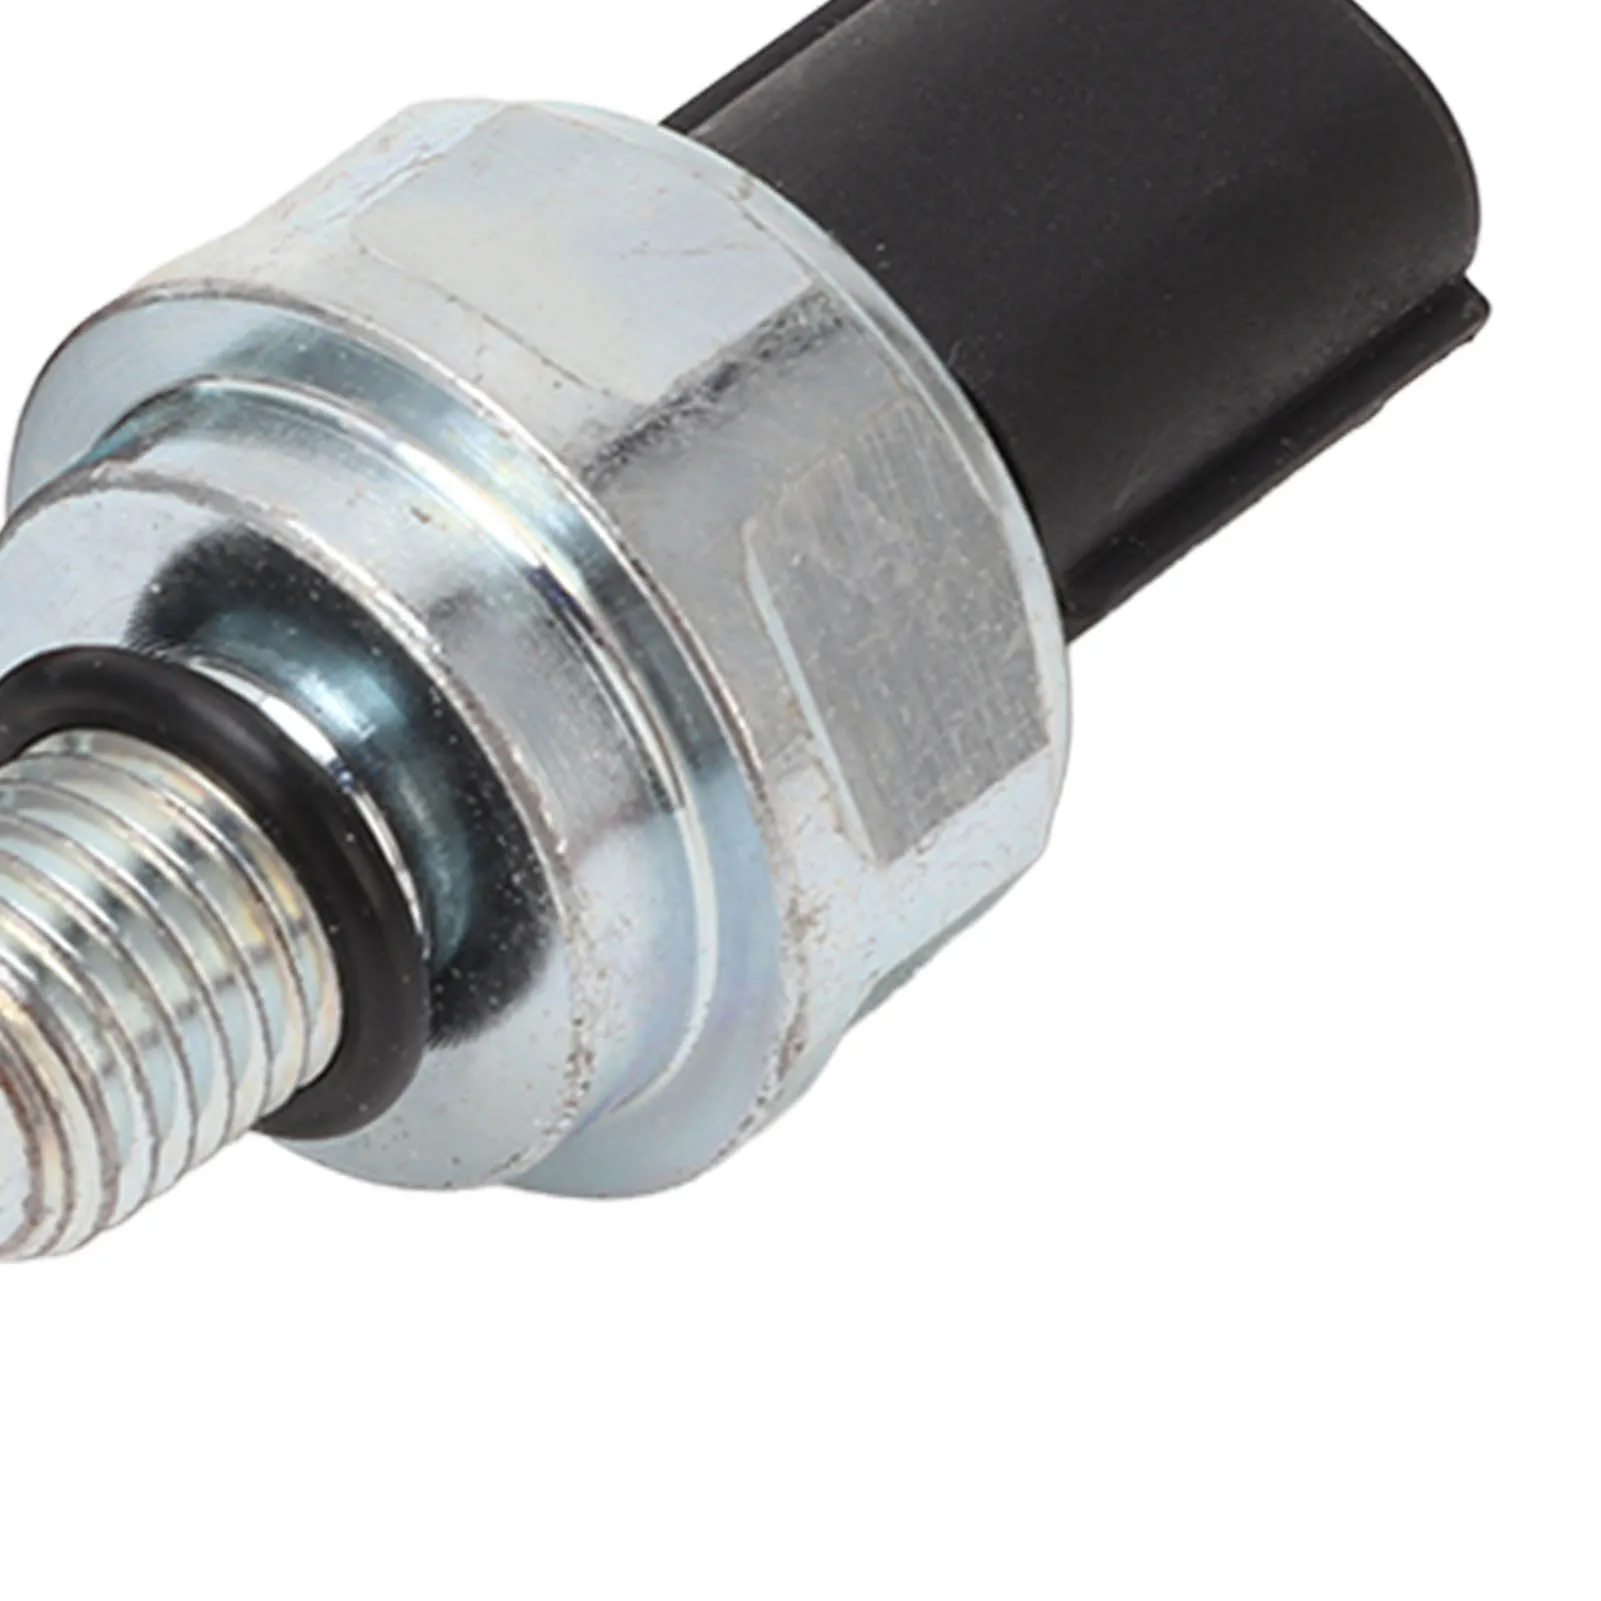 Transmission Pressure Switch High Sensitivity 28600 P7Z 003 for Acura MDX 2001 - £16.23 GBP